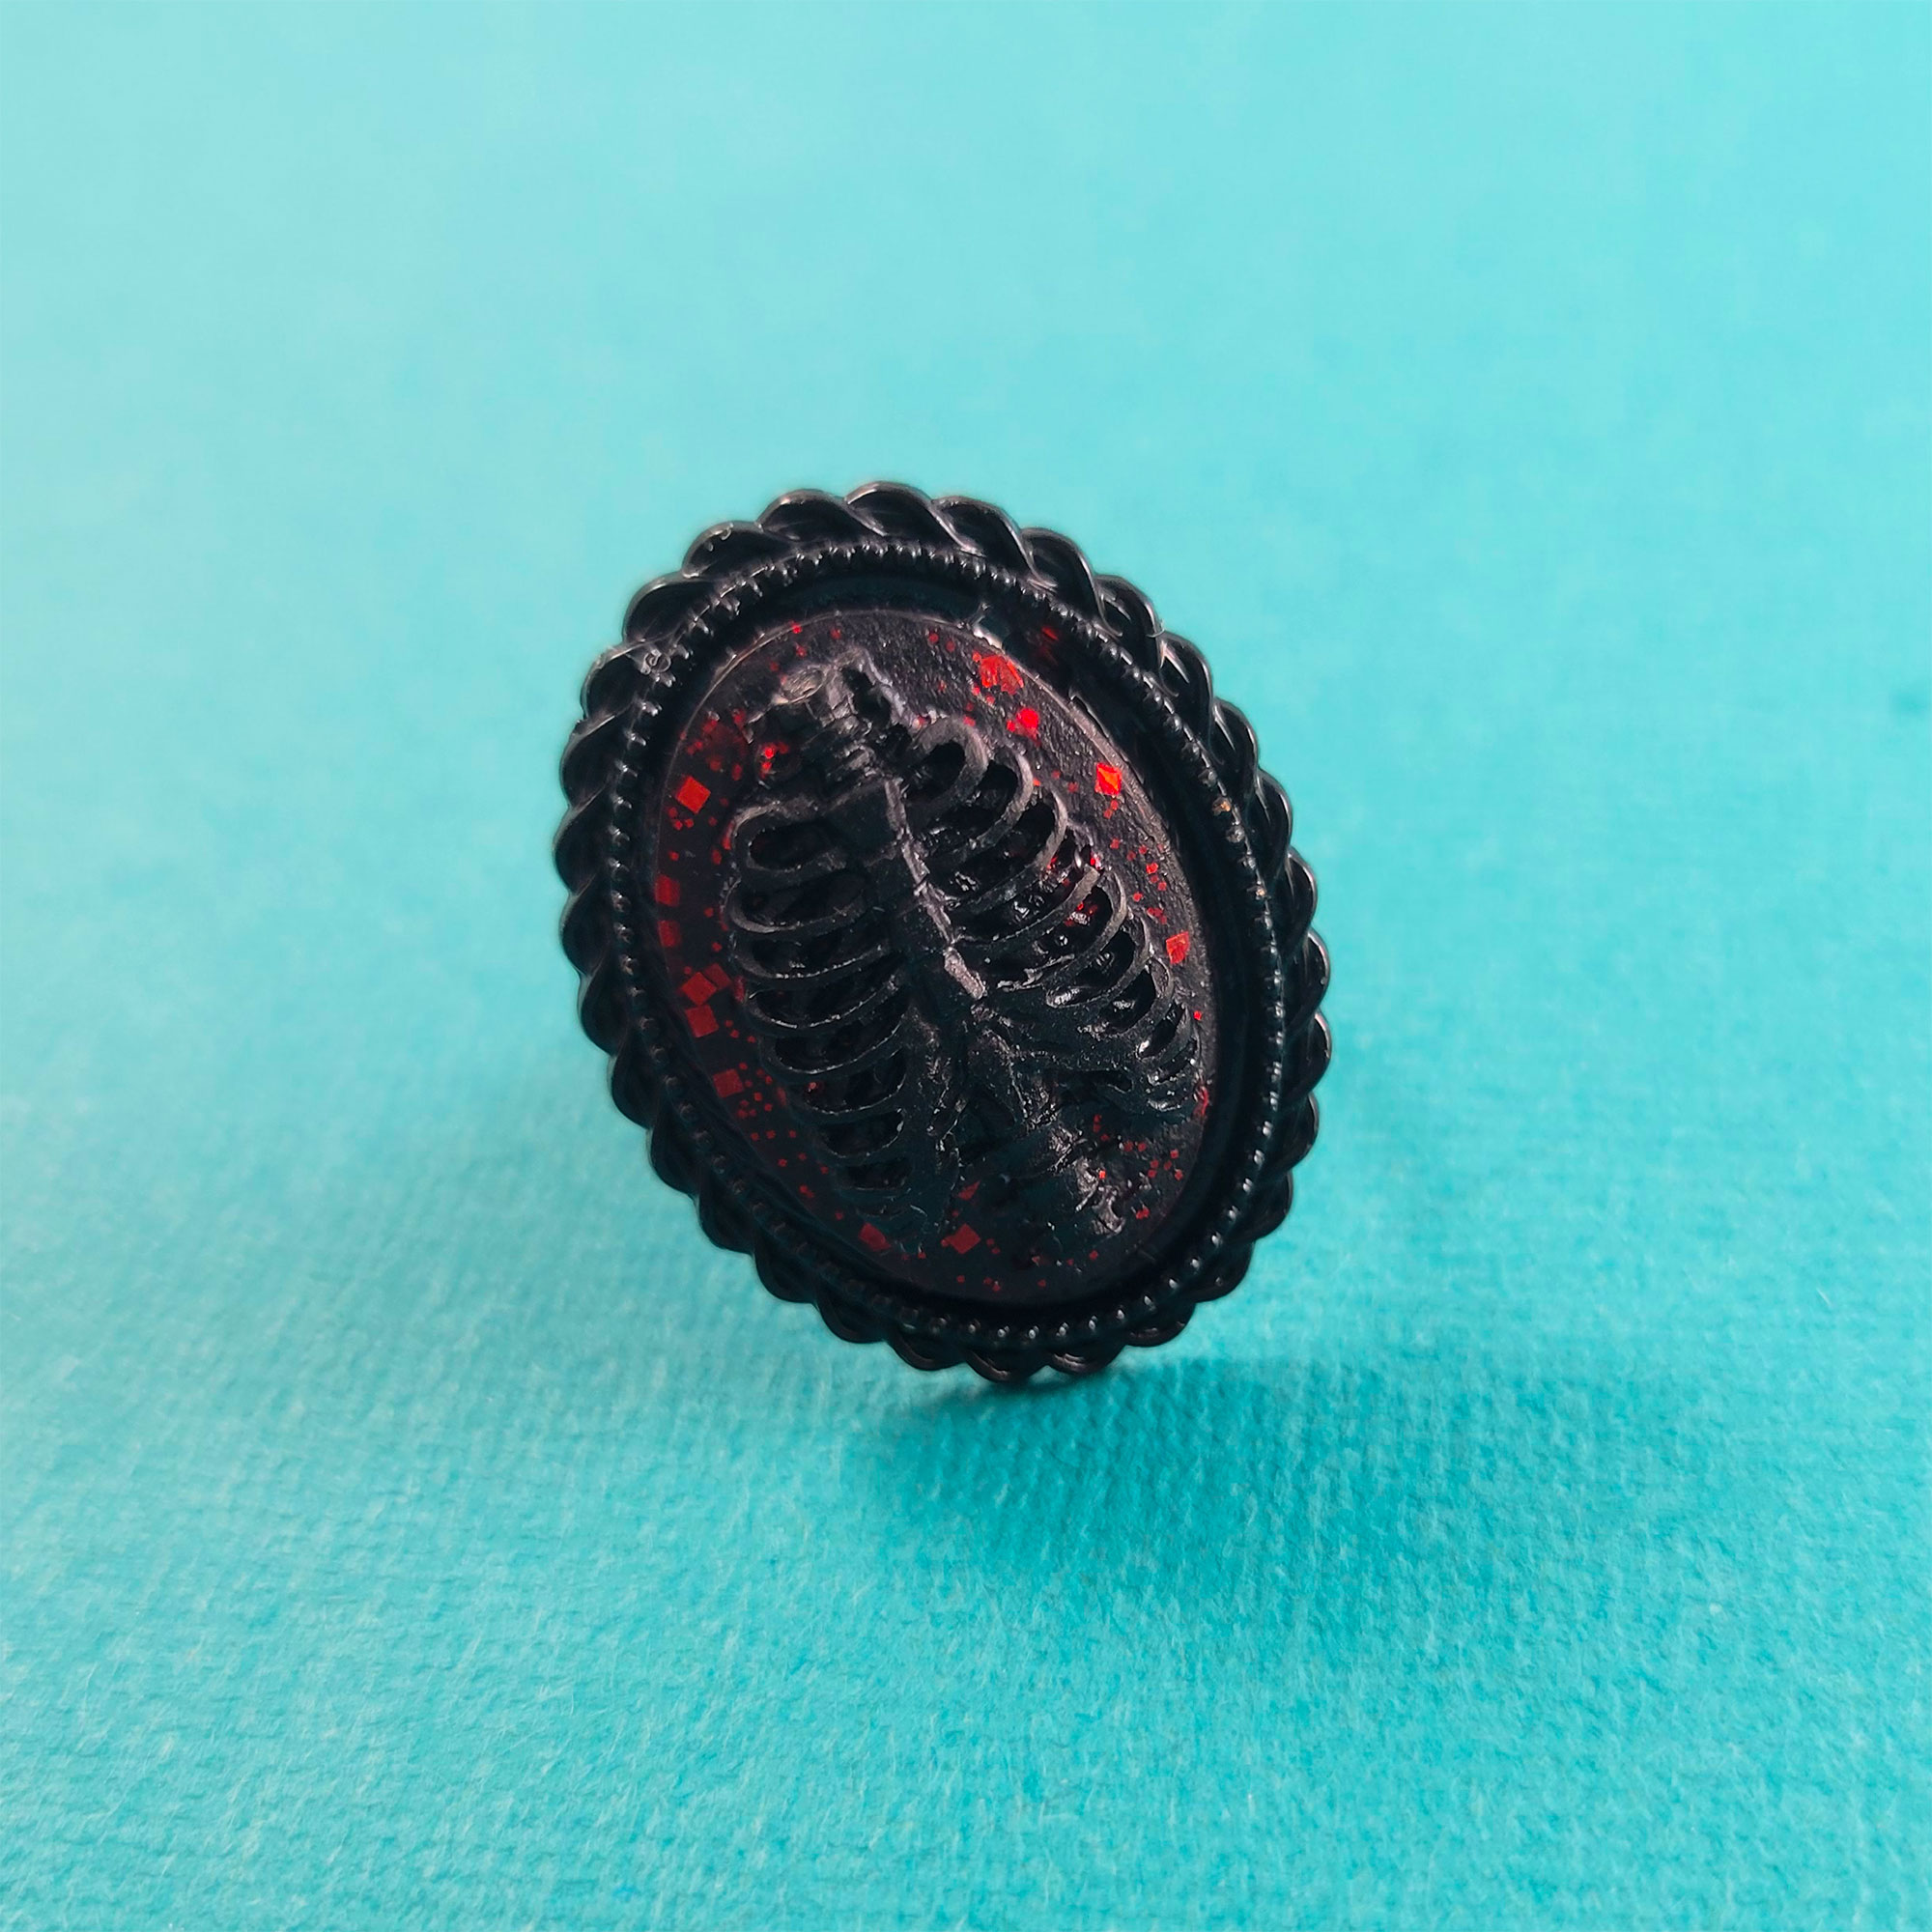 Black & Red Bare Bones Cameo Ring by Wilde Designs